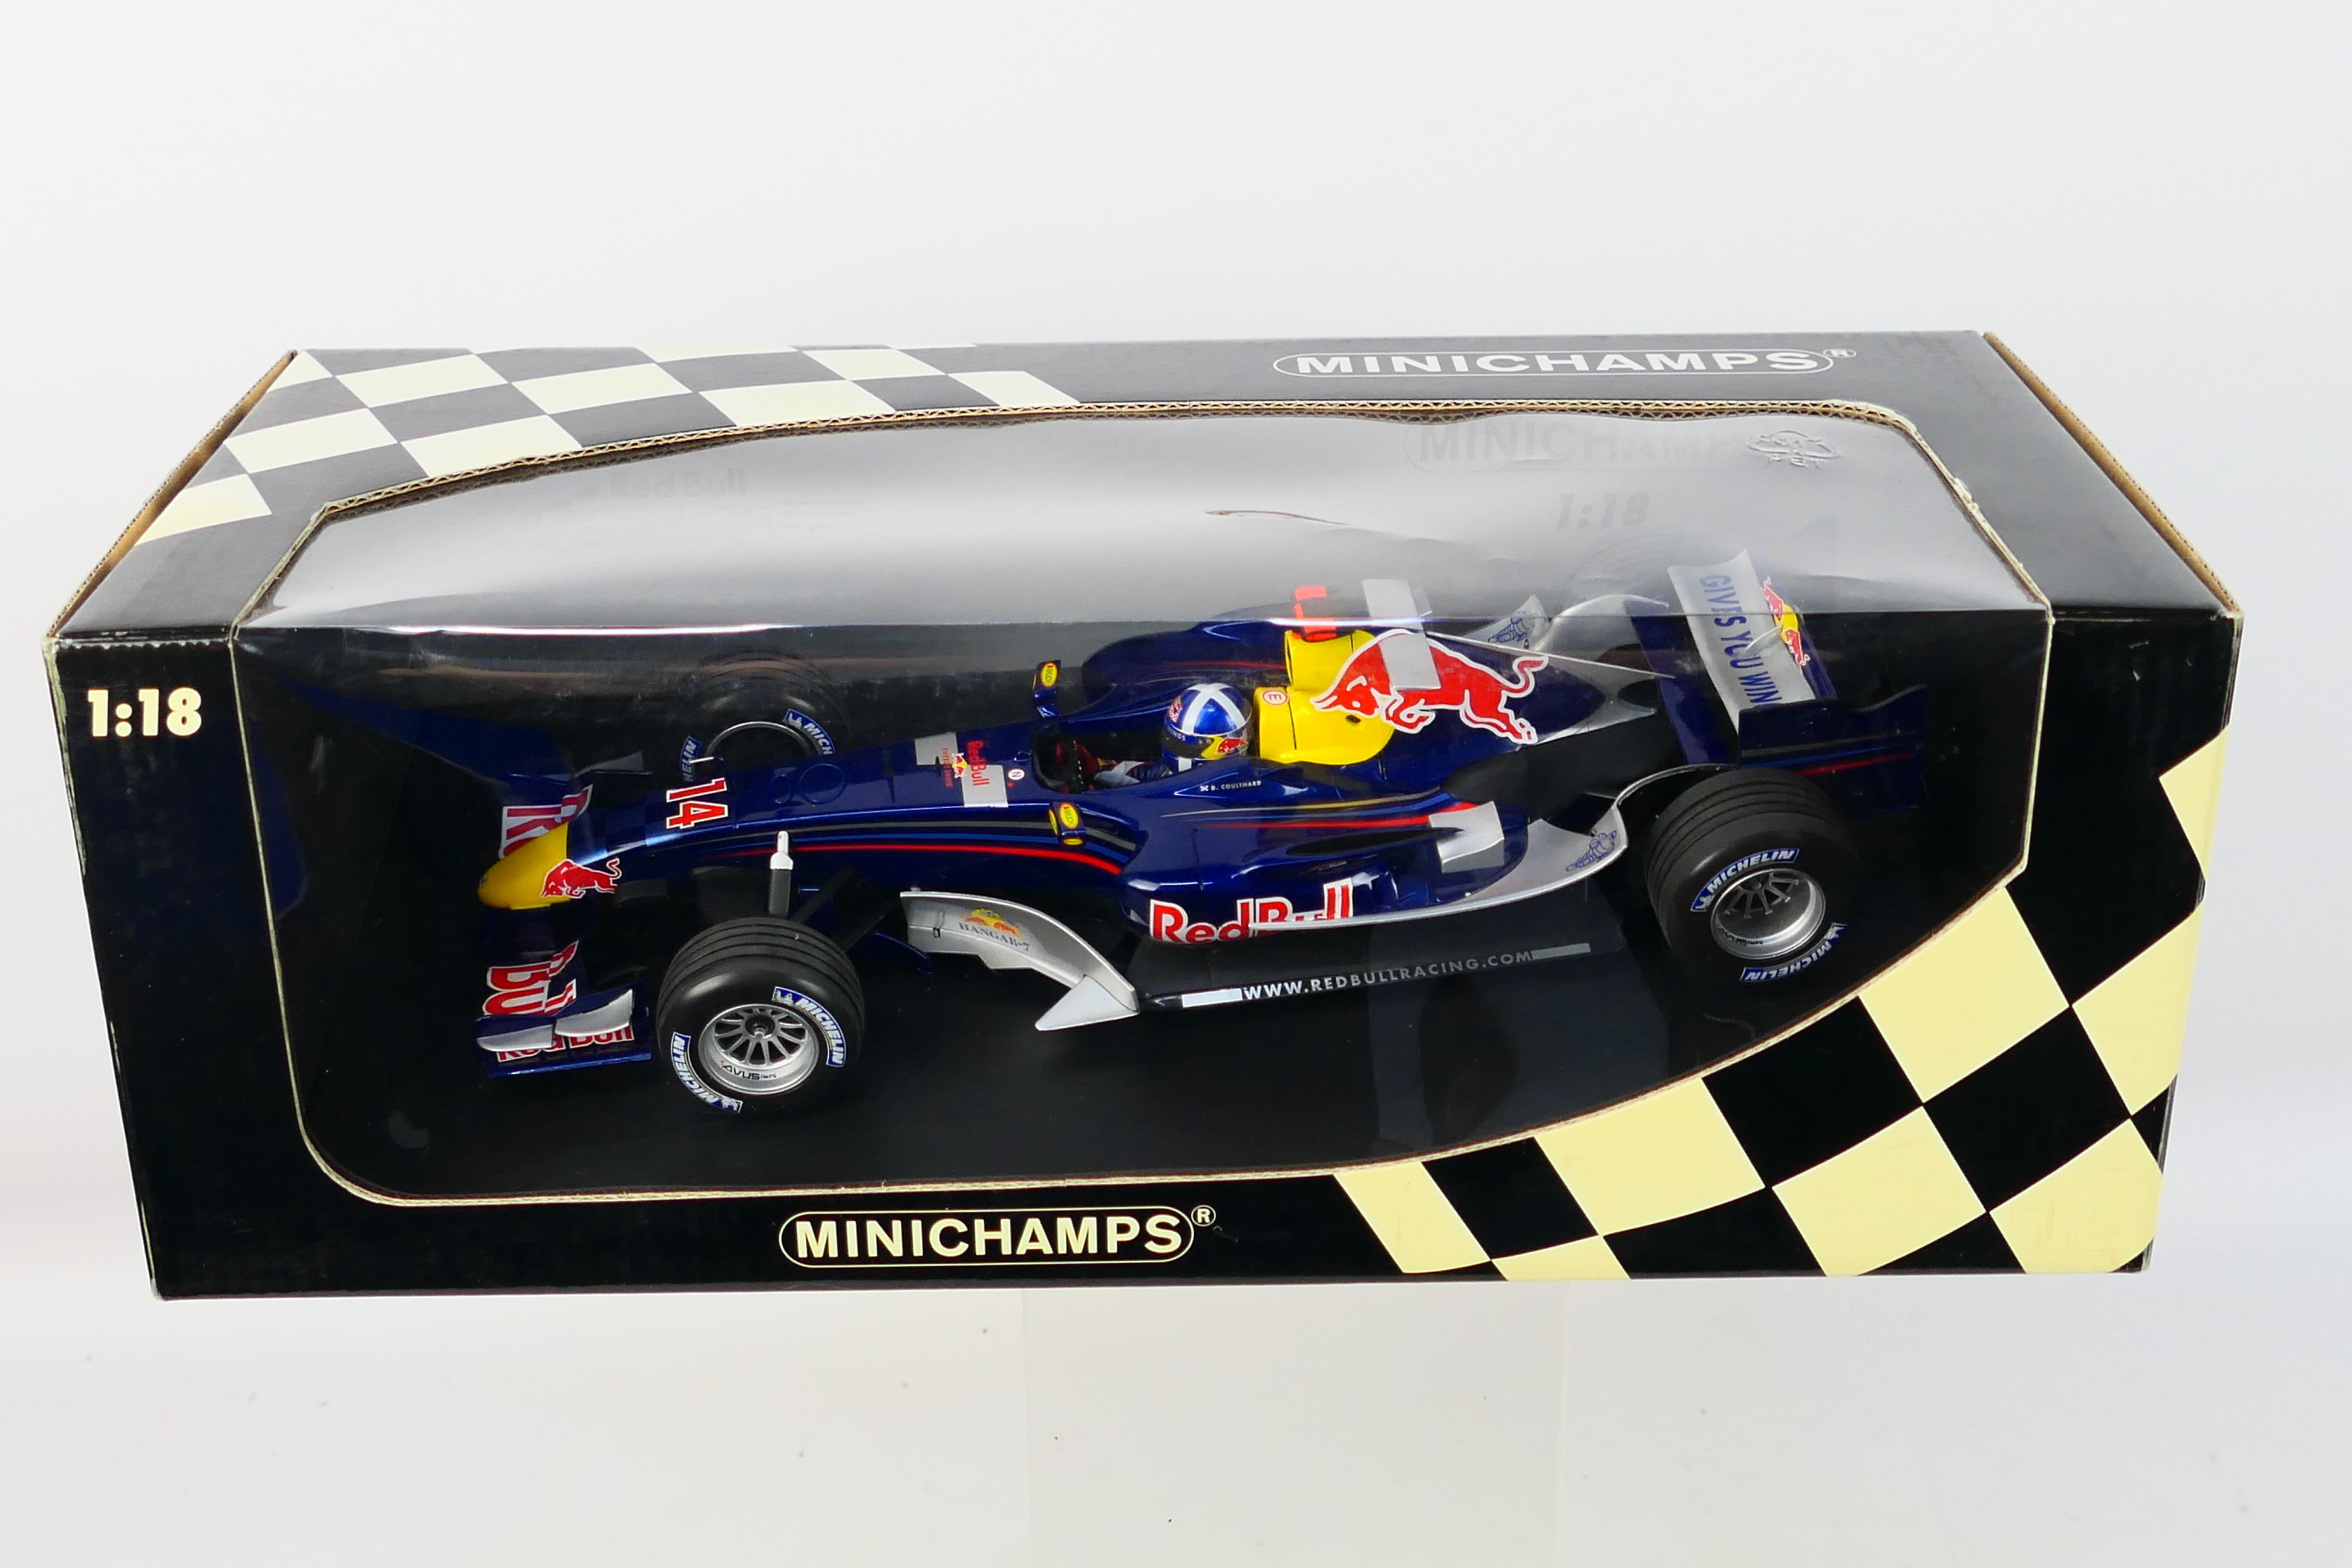 Minichamps- A boxed 1:18 scale Red Bull Racing RB2 David Coulthard 2006 car which appears Mint in a - Image 3 of 3